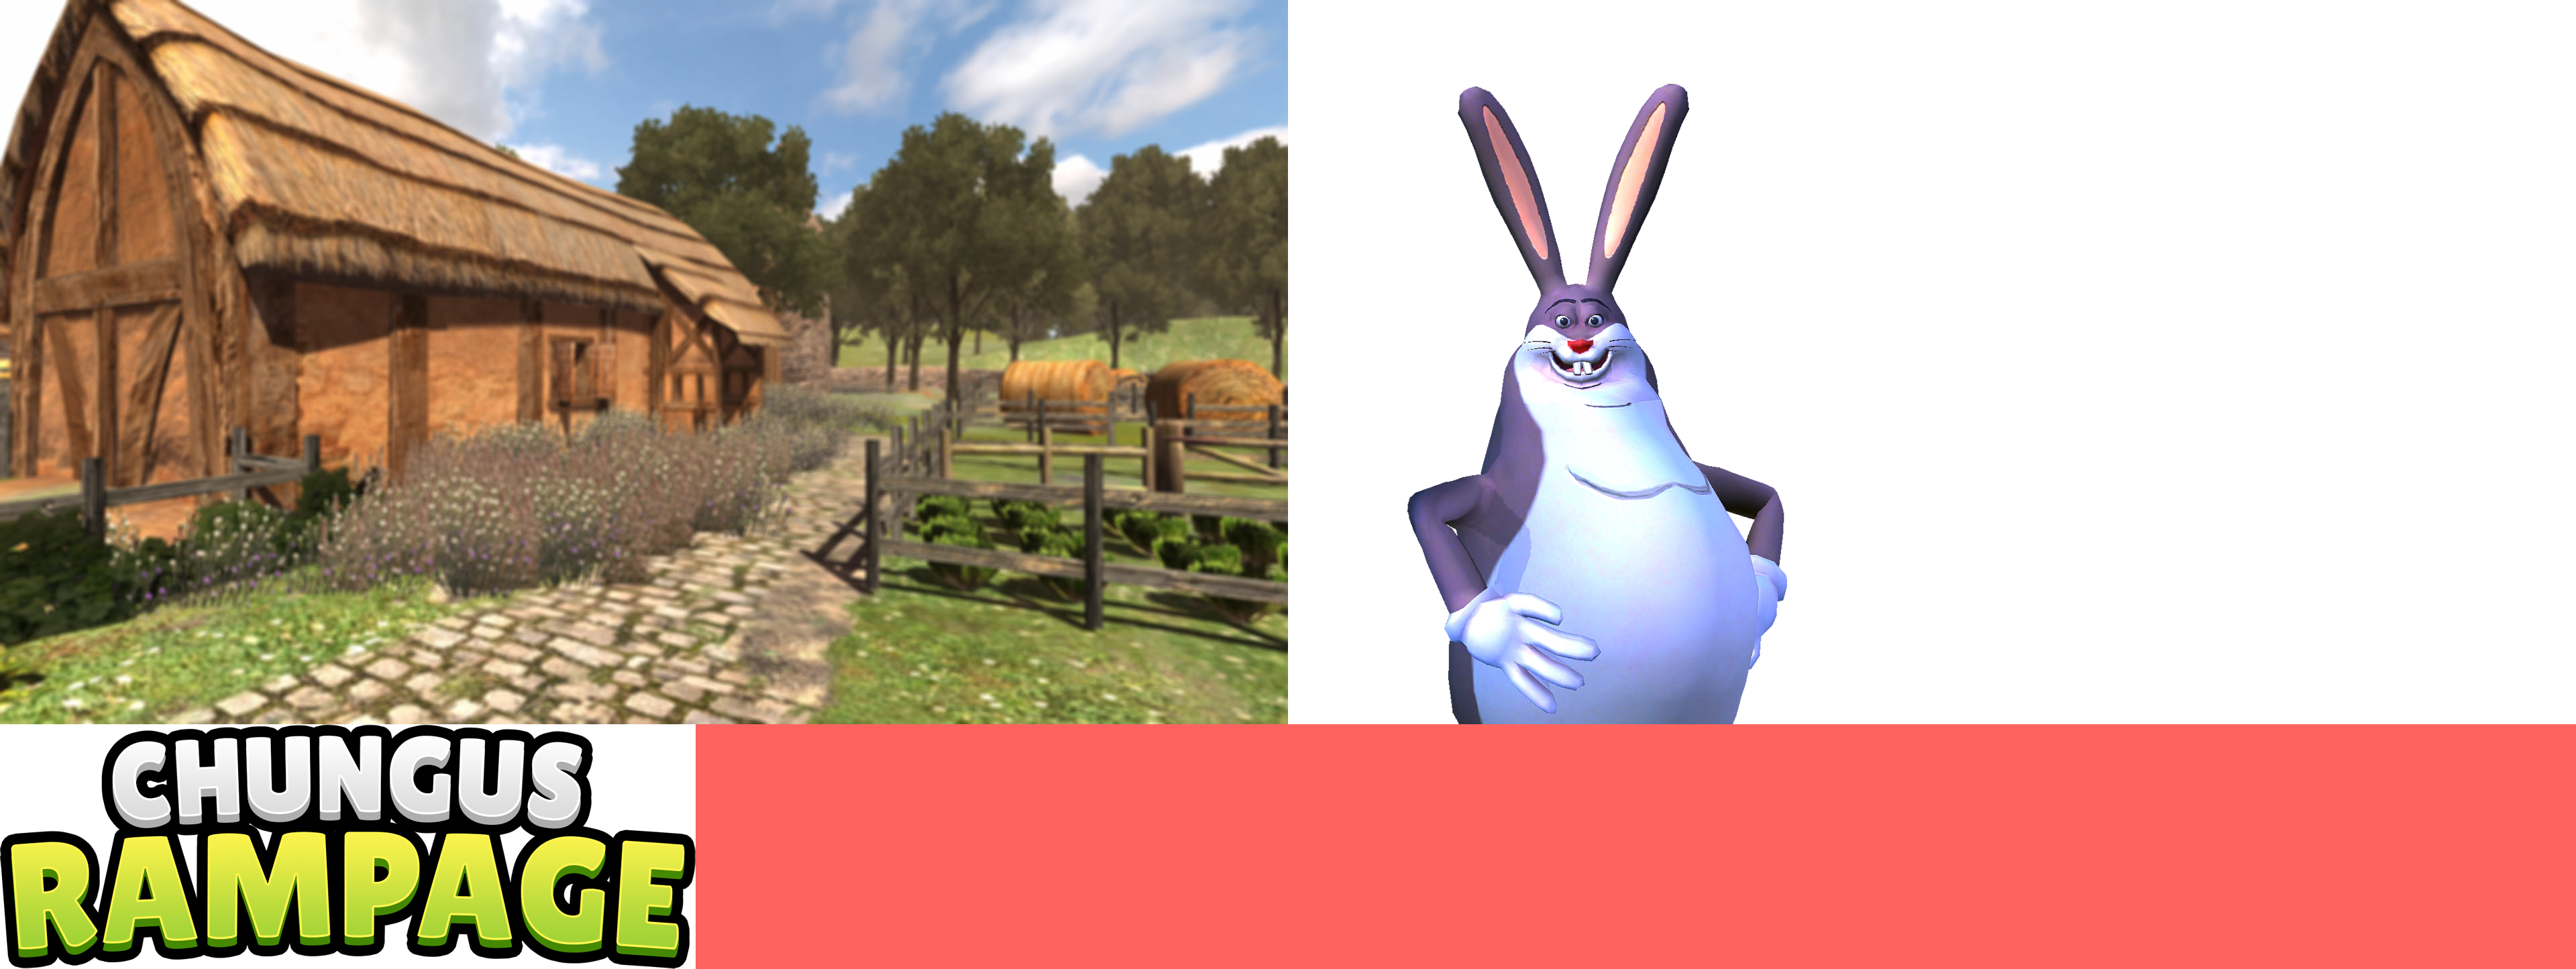 Chungus Rampage in Big Forest - Title Screen